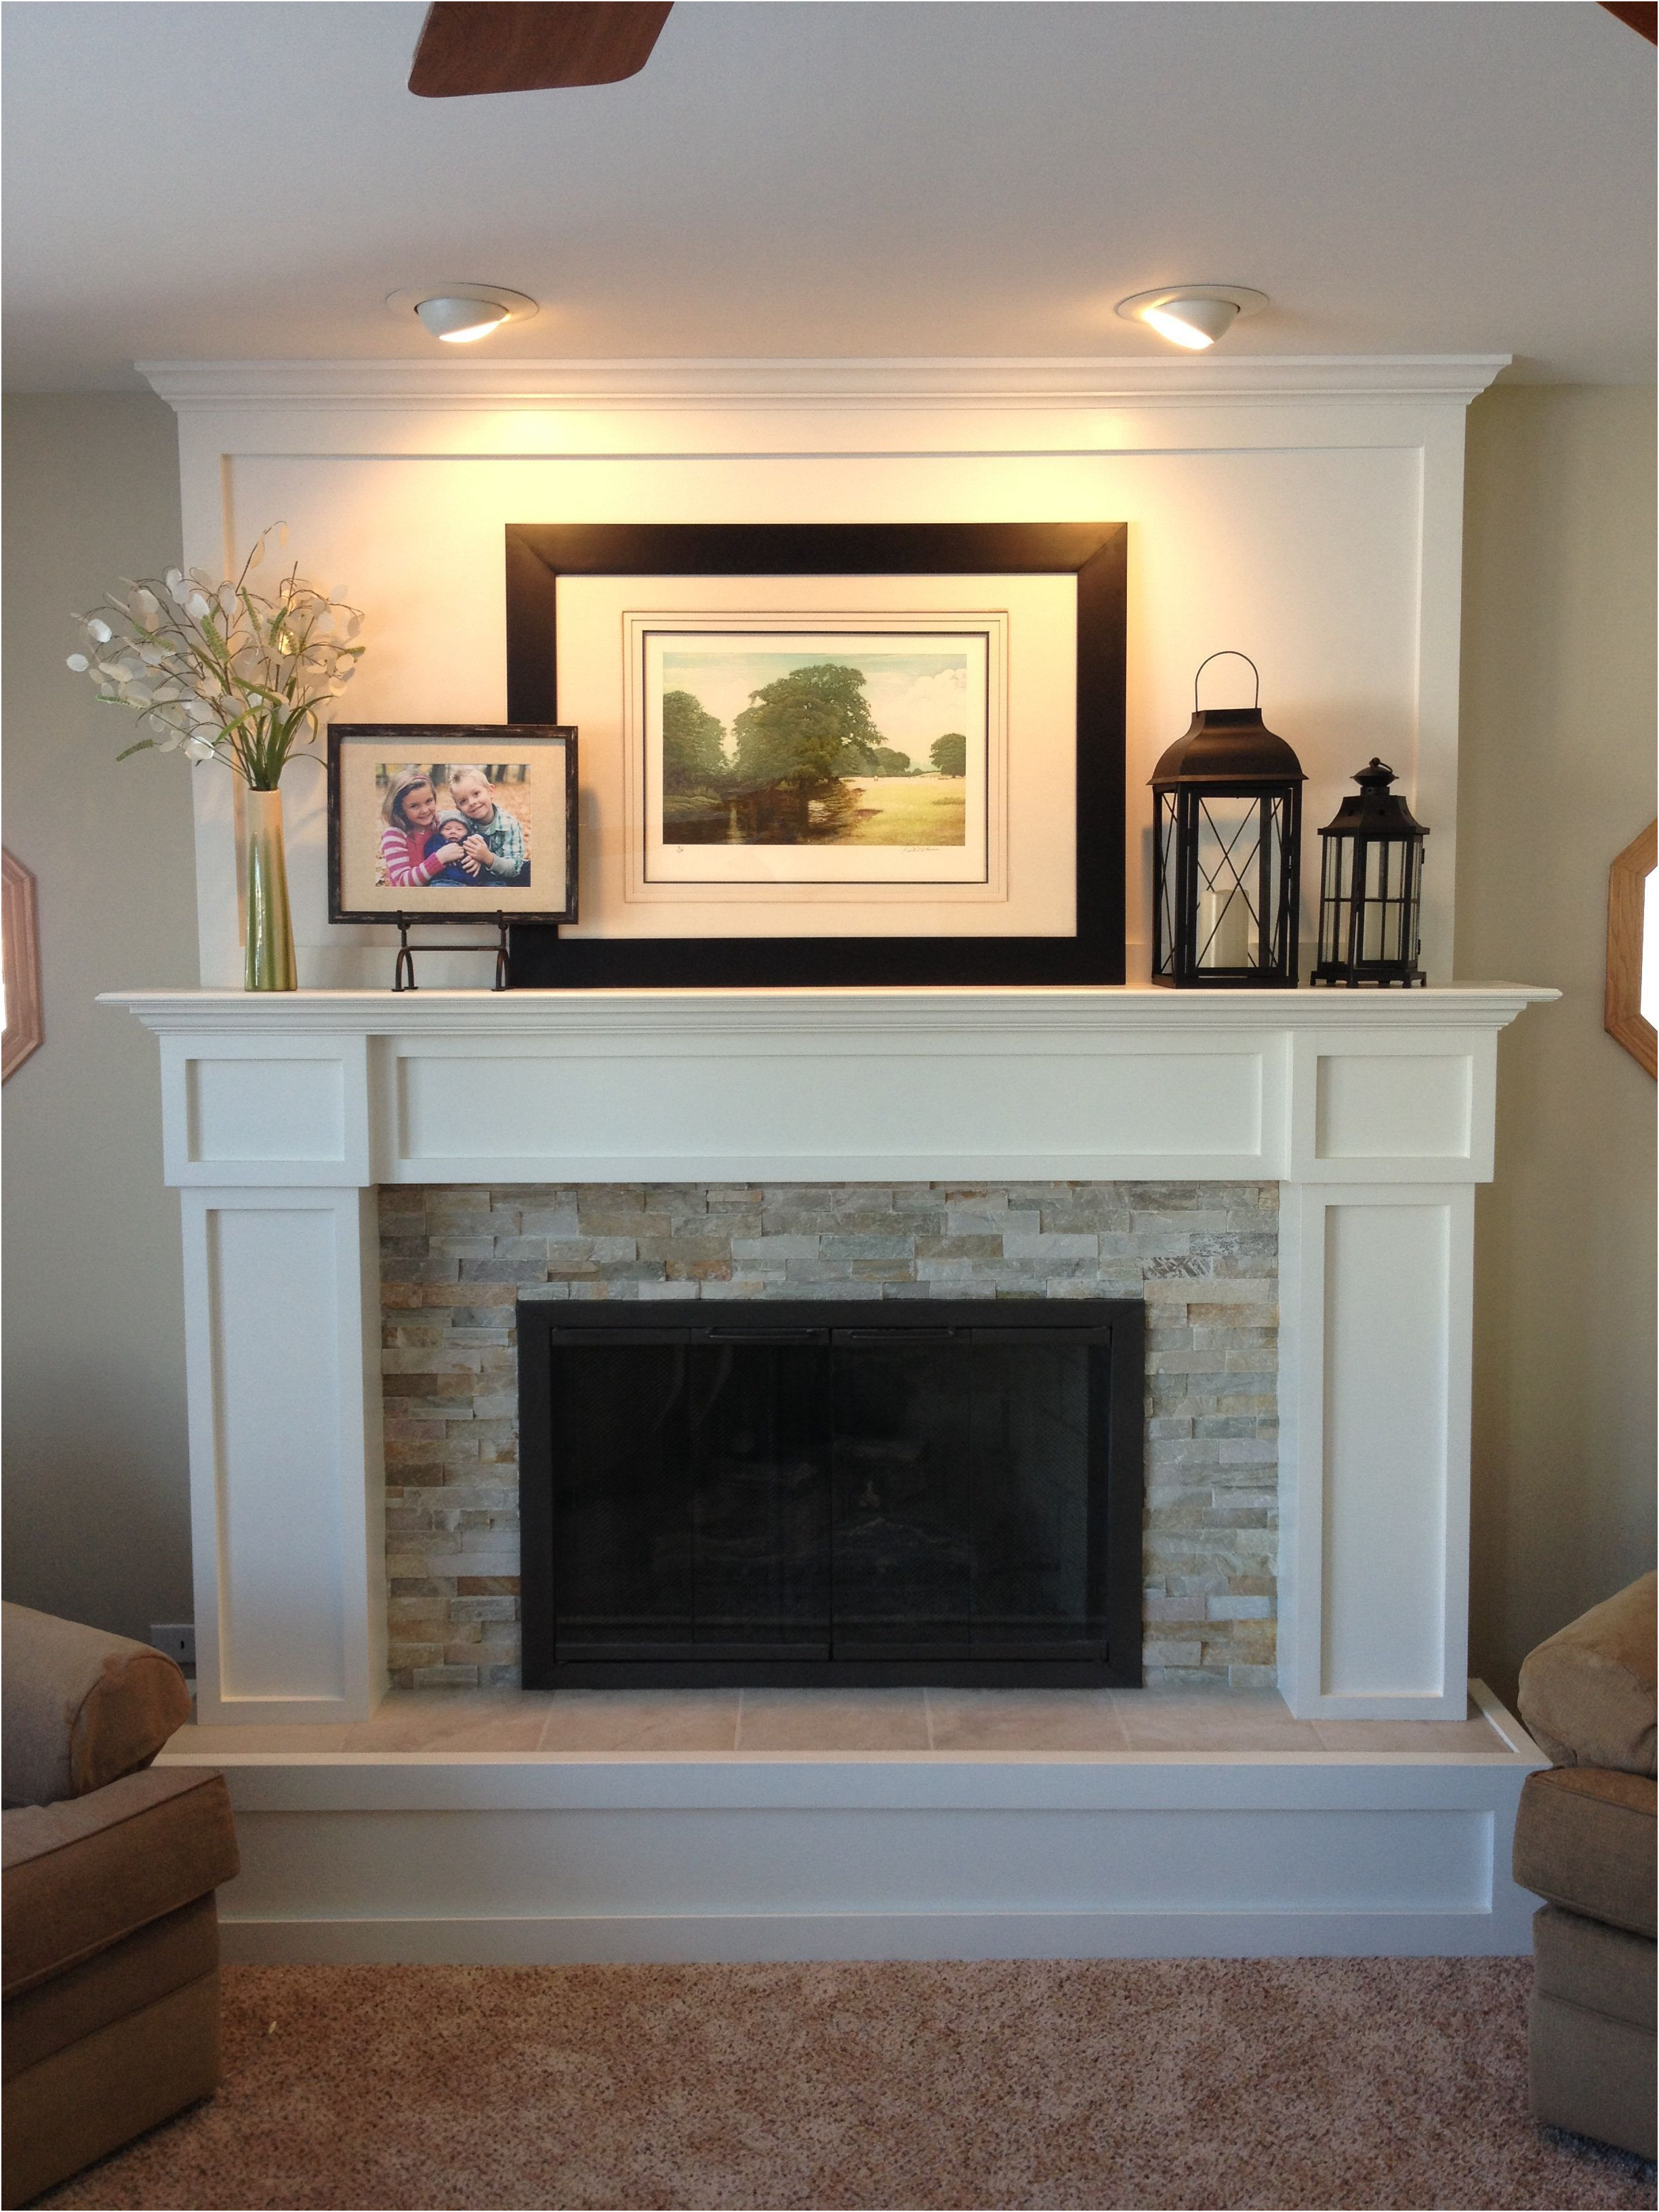 Lovely Ideas to Decorate Fireplace